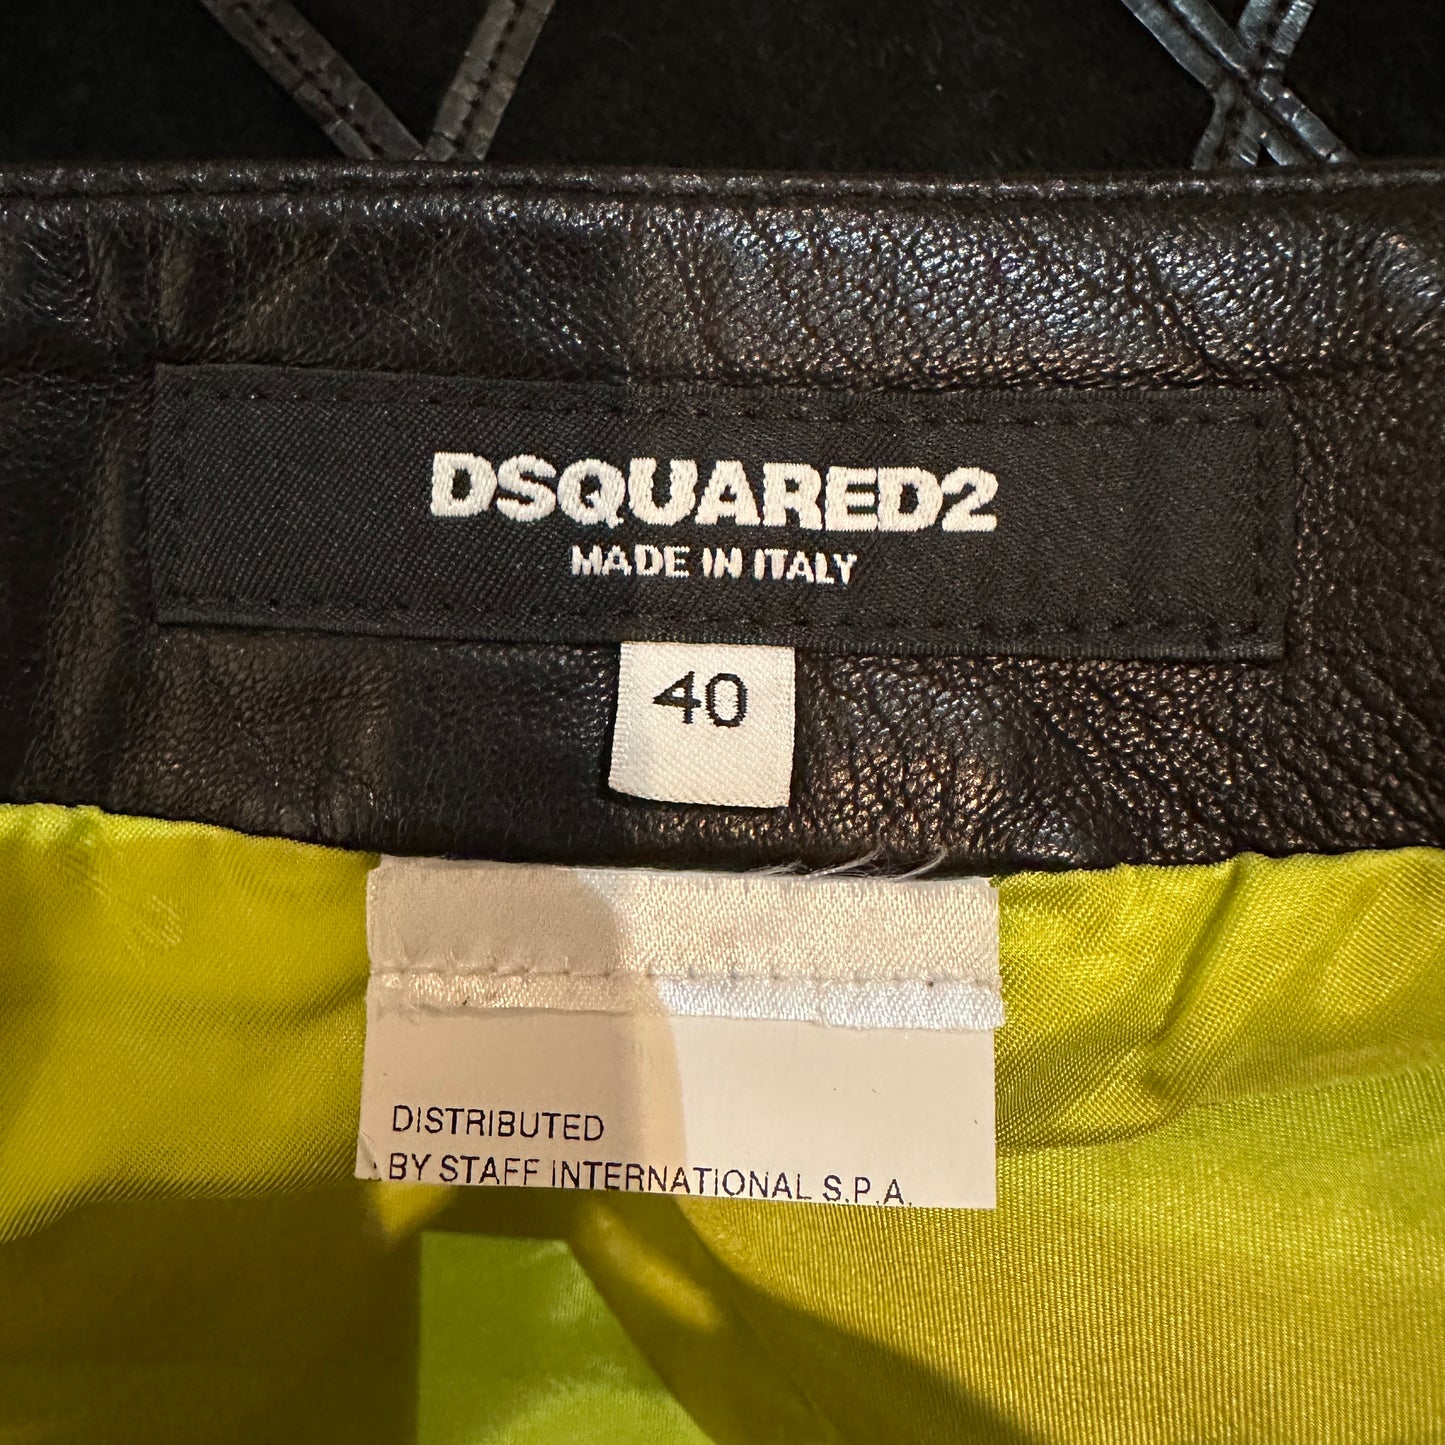 DSquared2 Black Leather & Suede Mini Skirt